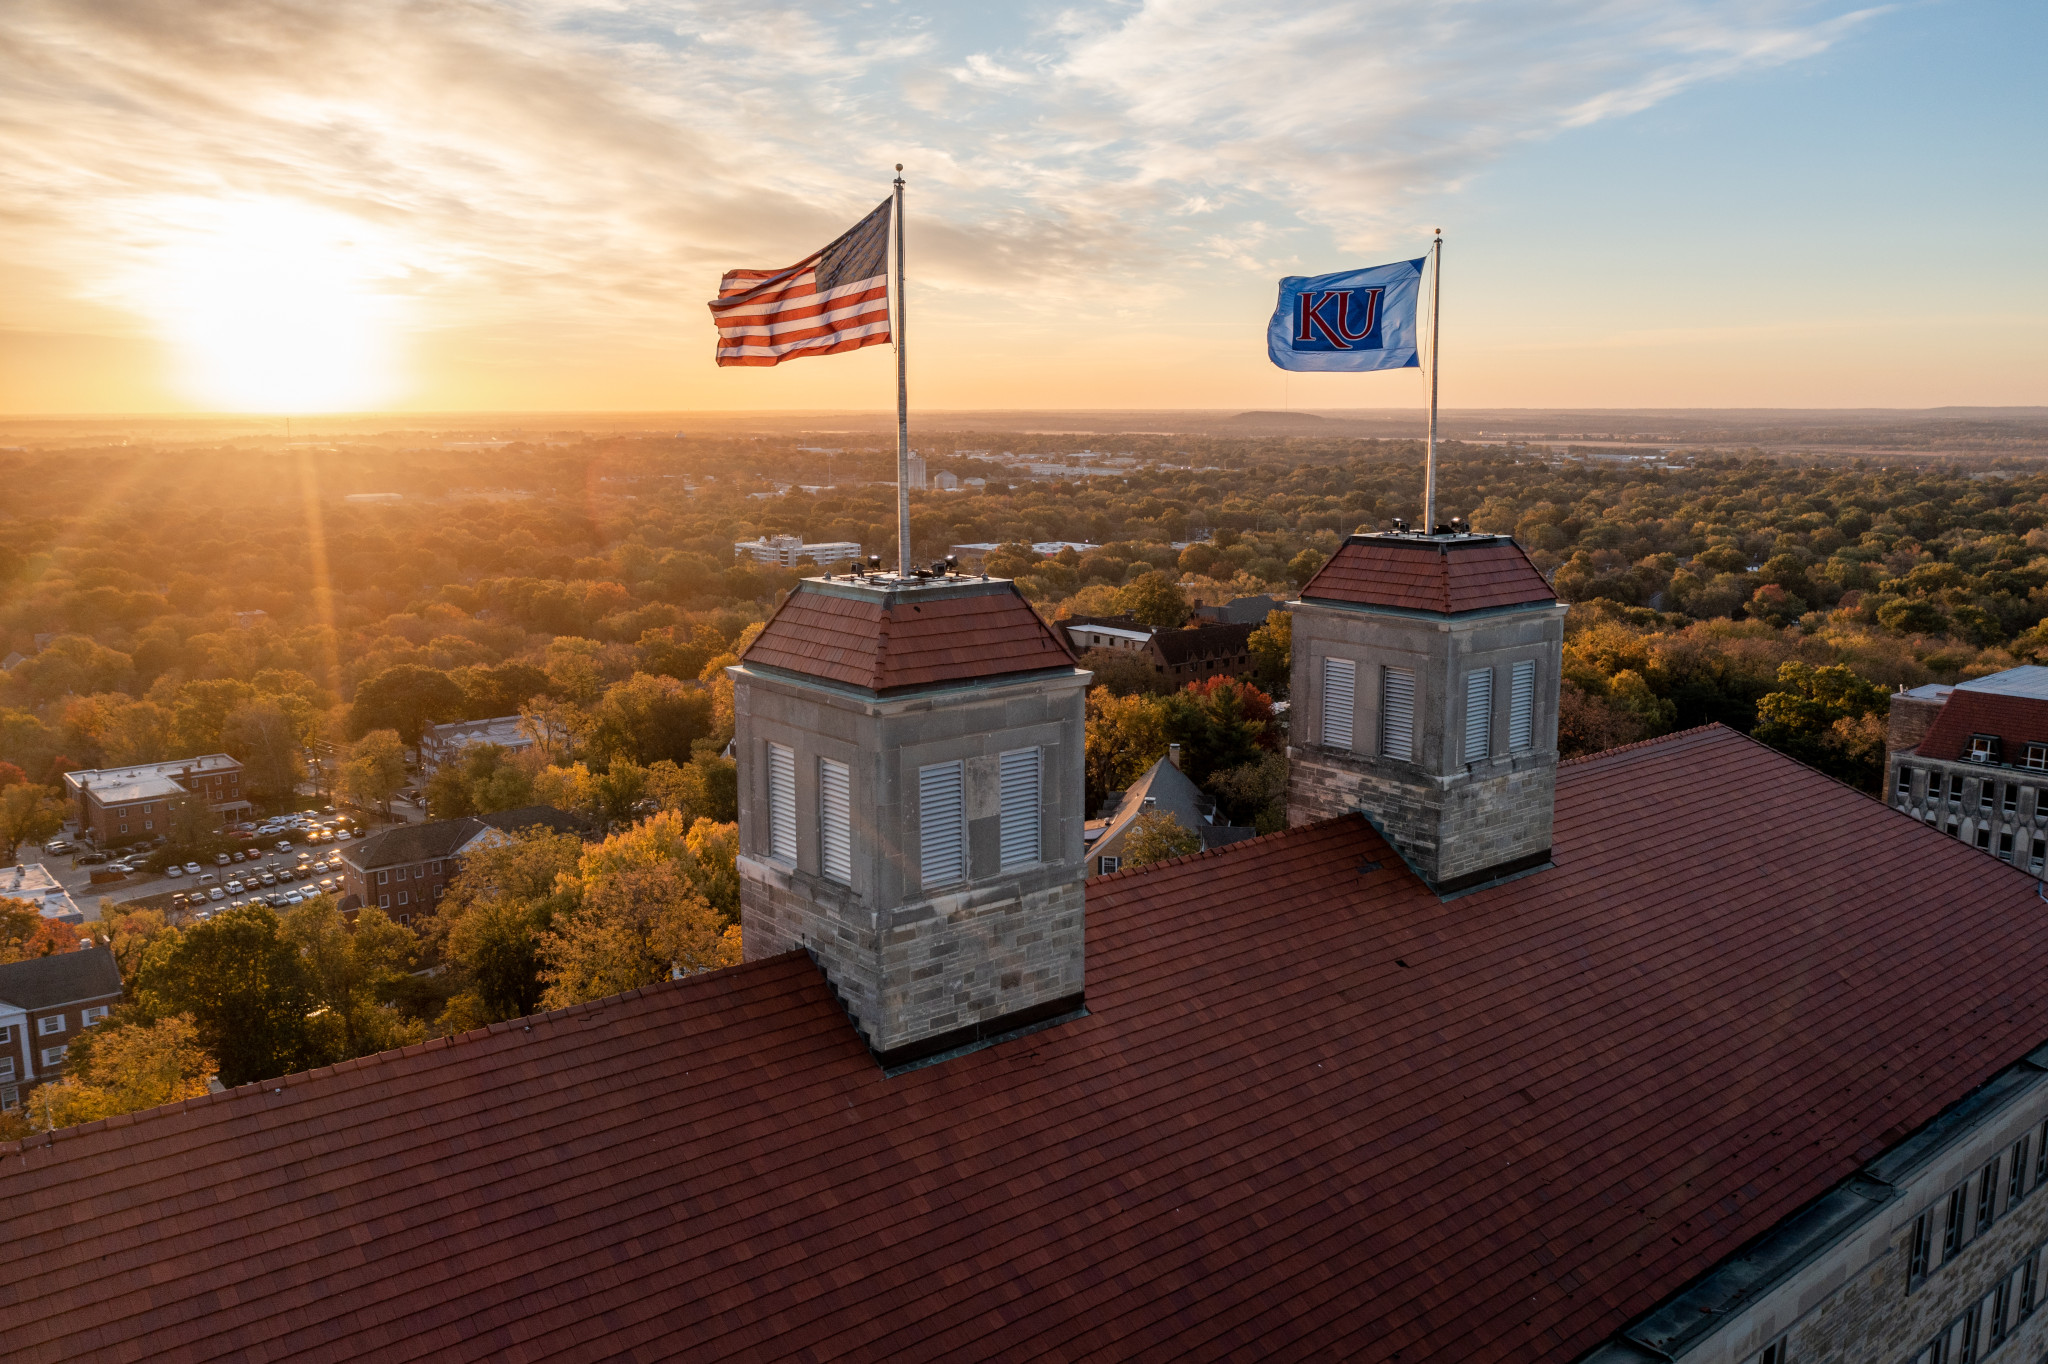 The sun shines brightly on the flags atop Fraser Hall.